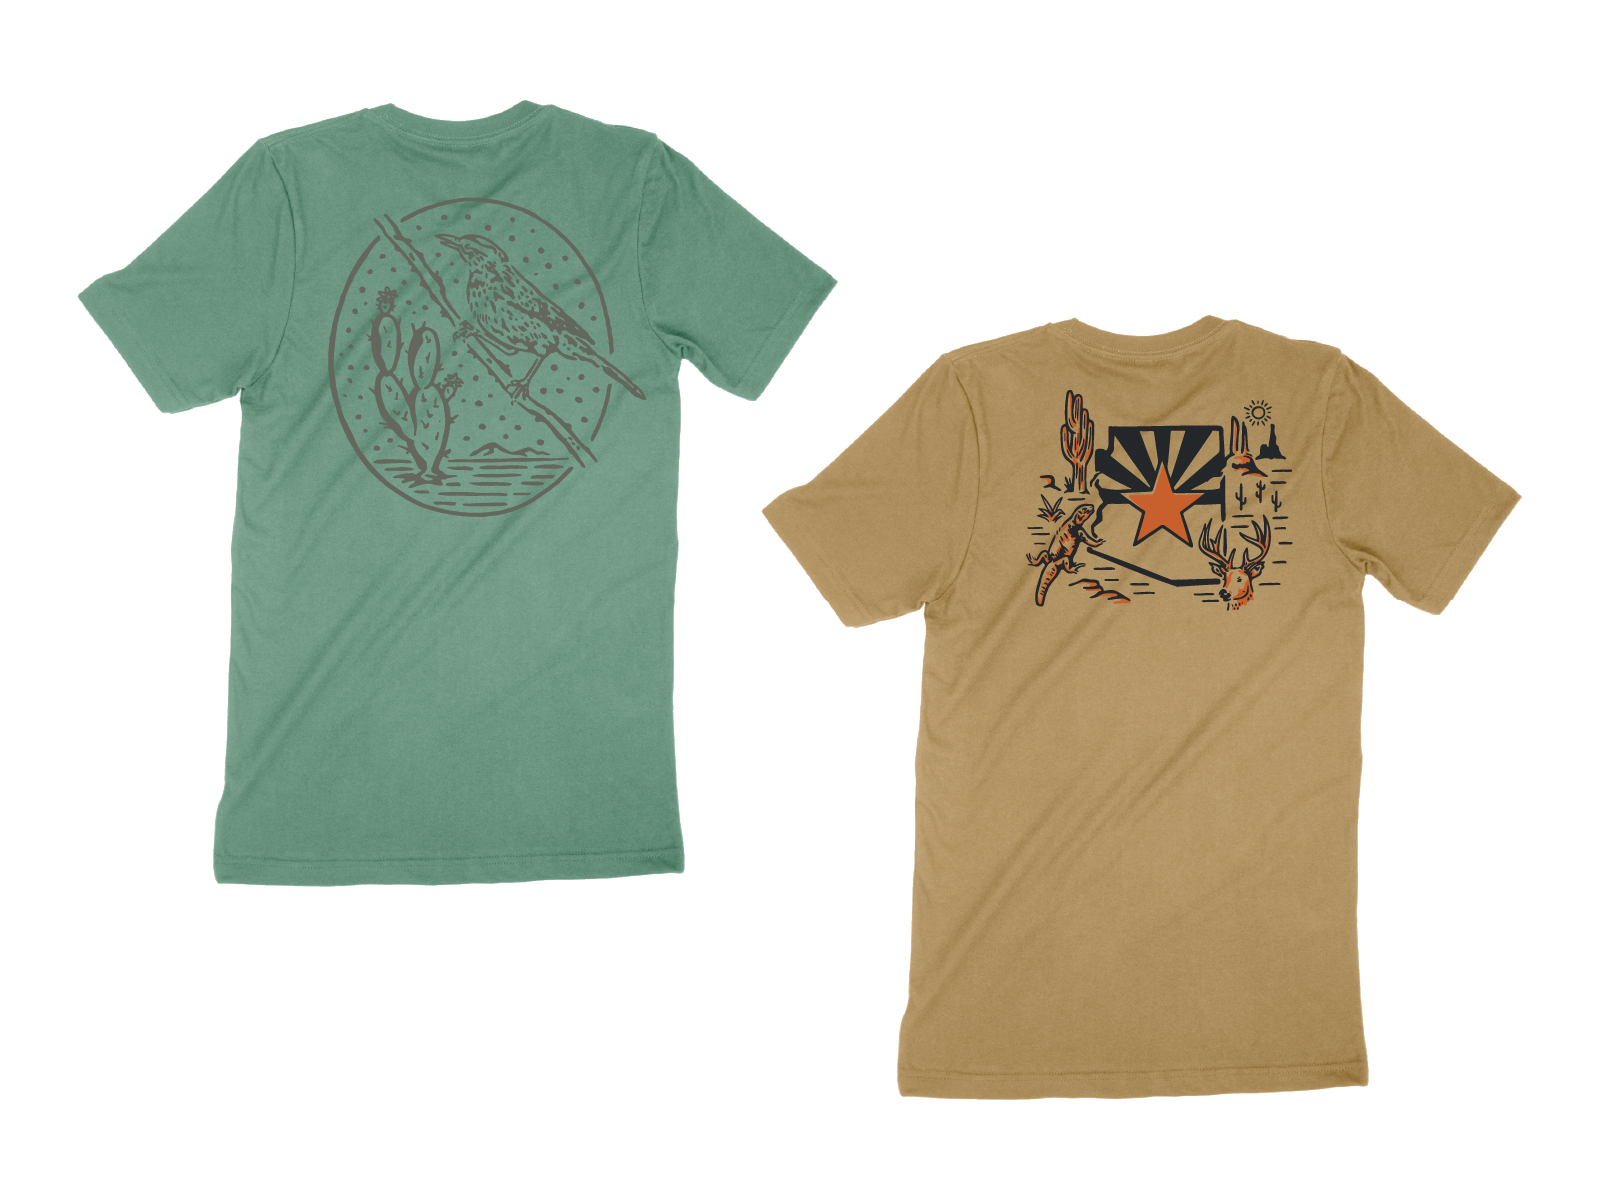 CAMELBACK T-SHIRT DESIGNS by WEIRDFACE BRAND on Dribbble